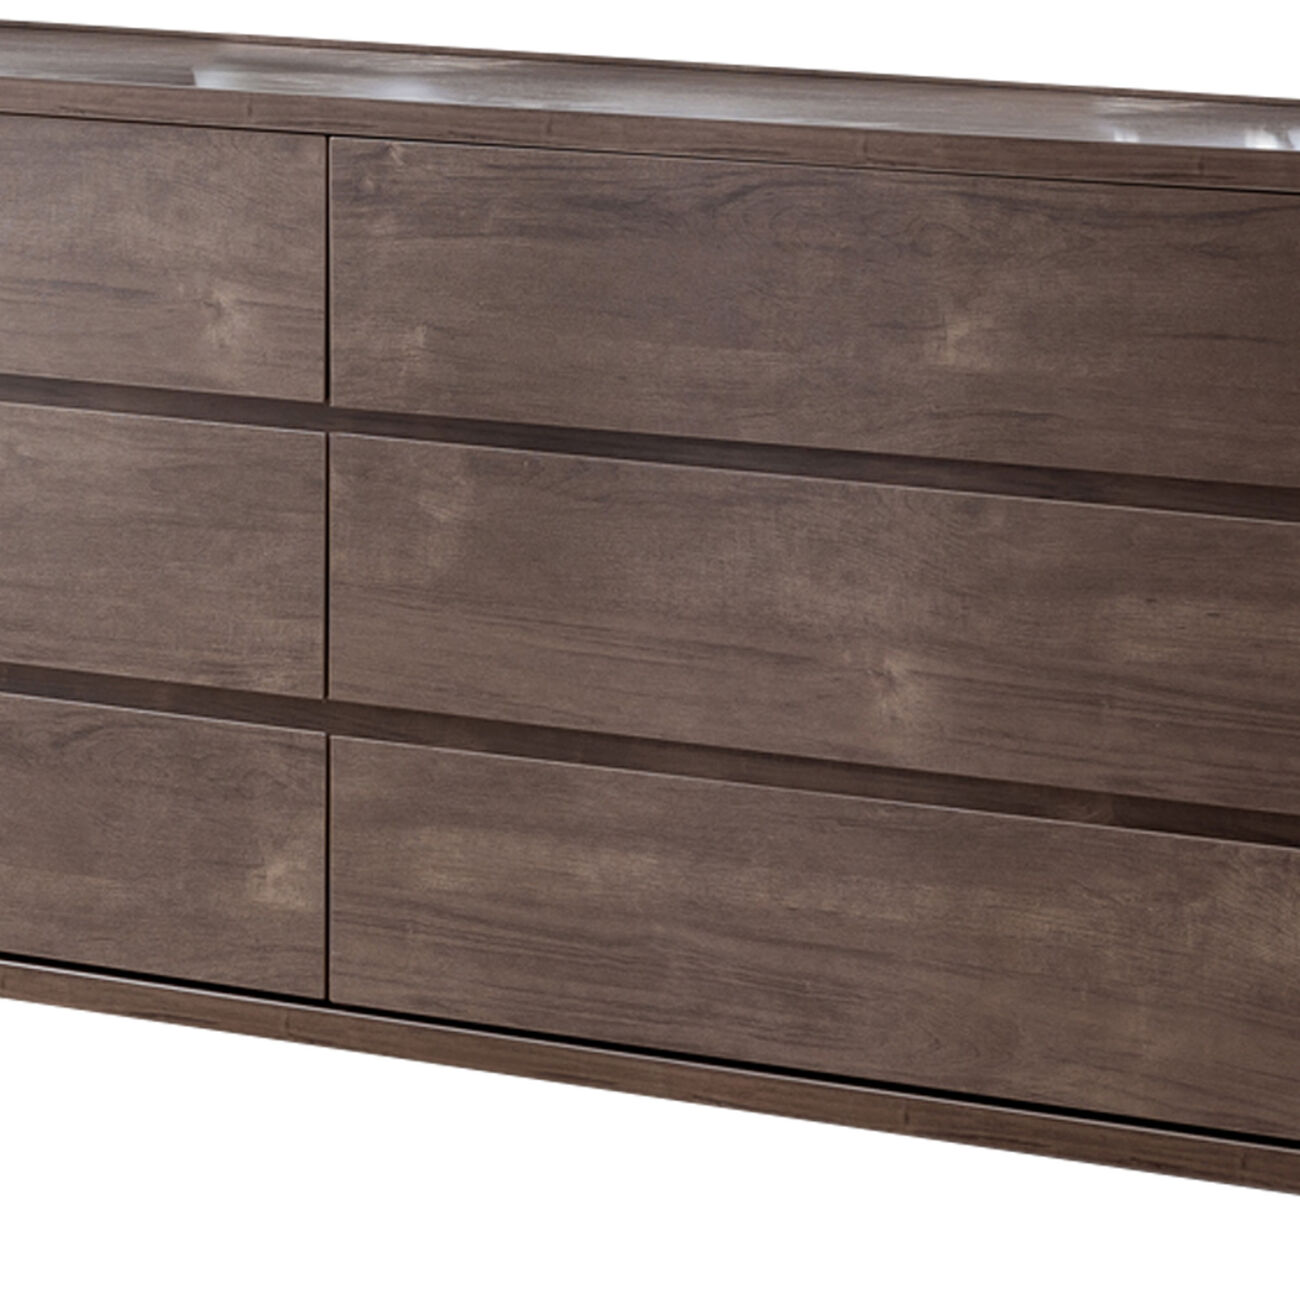 Wooden Frame Dresser with 6 Drawers and Straight Legs, Hazelnut Brown